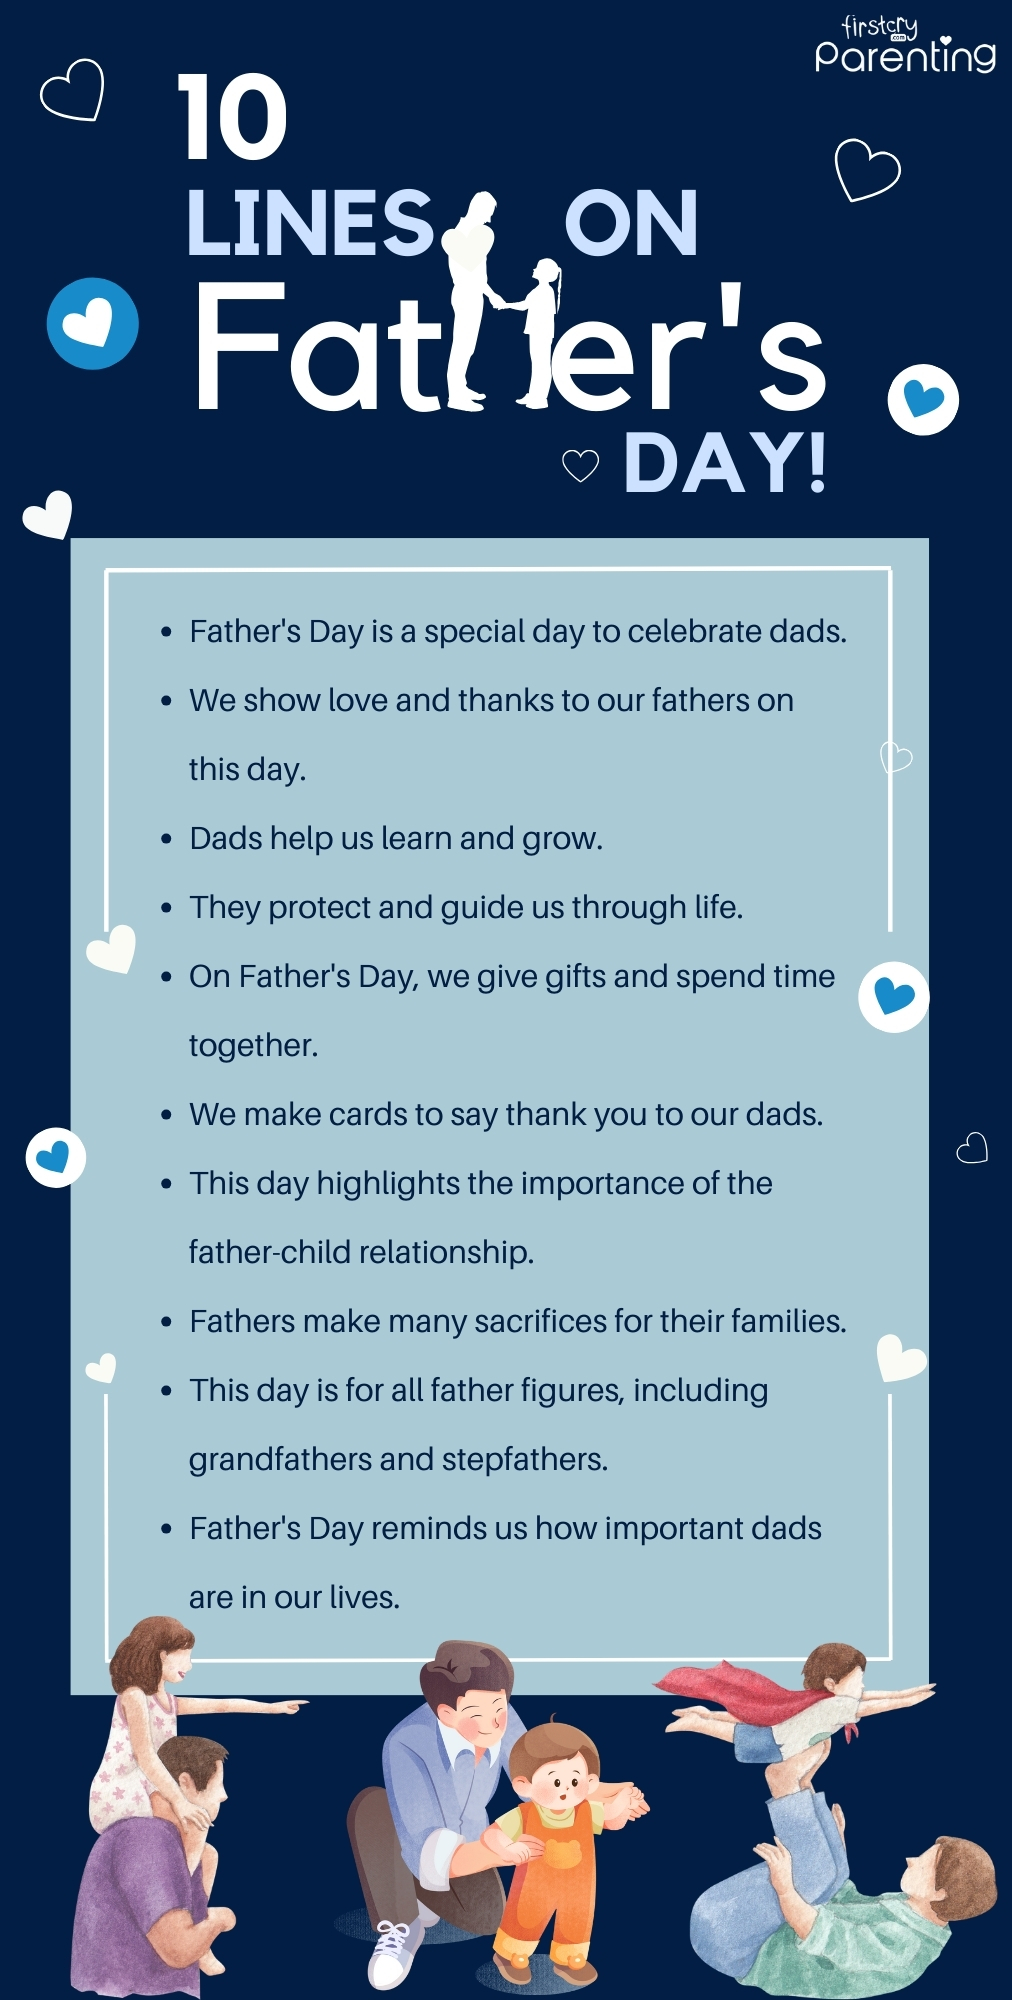 10 Lines on Fathers Day